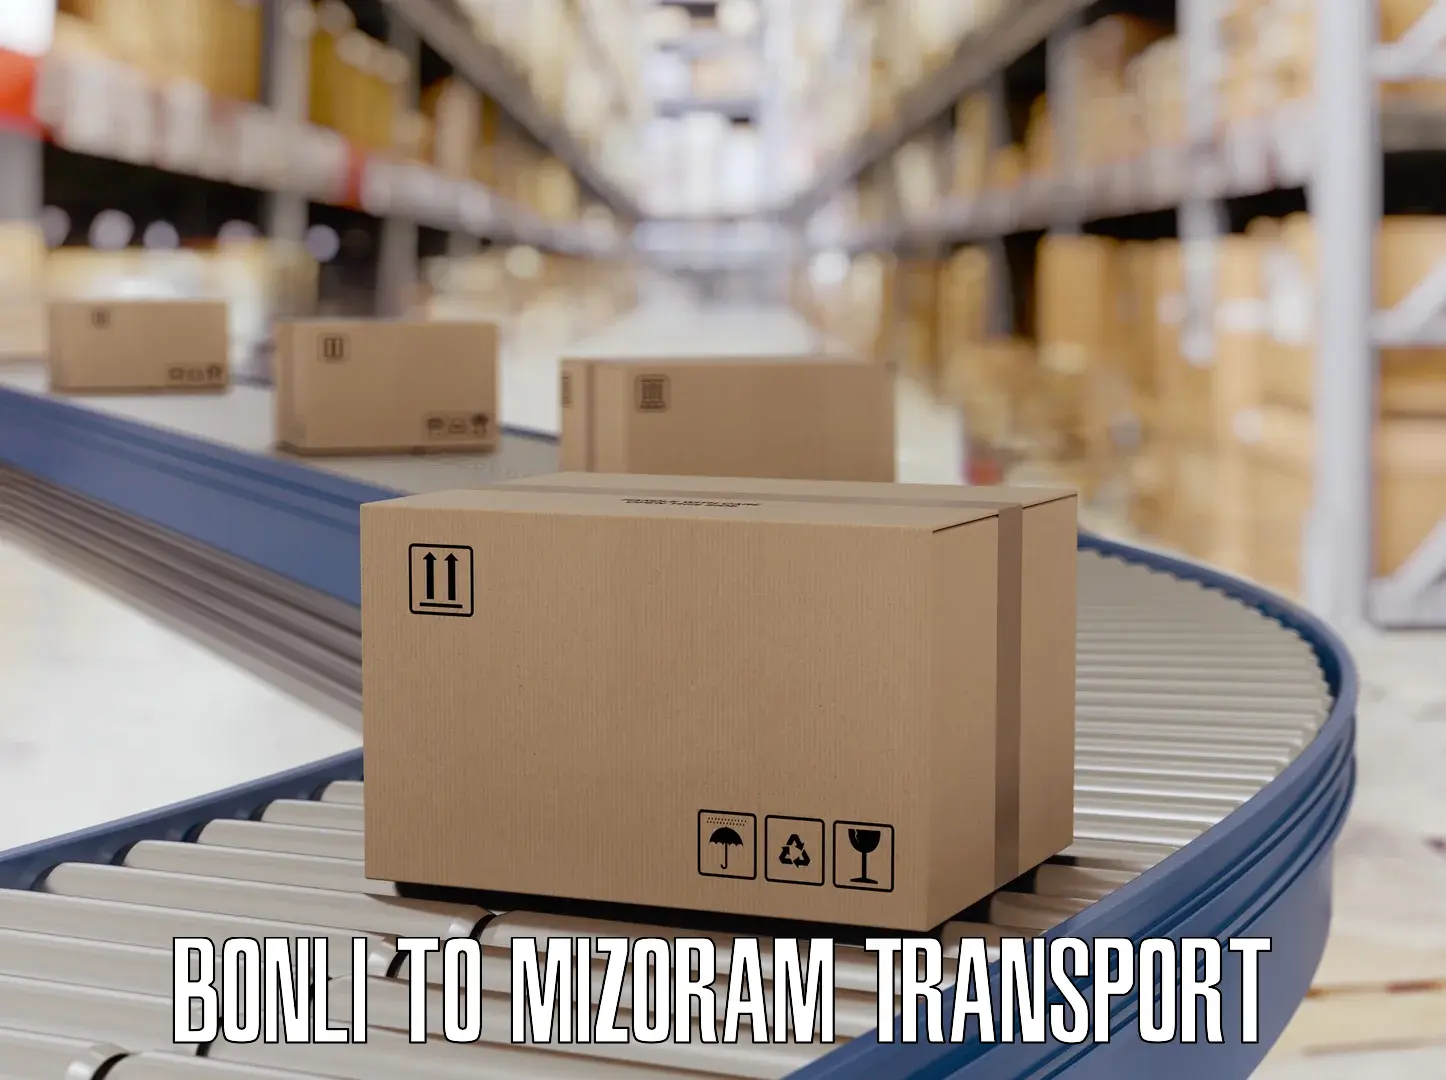 Package delivery services Bonli to Mizoram